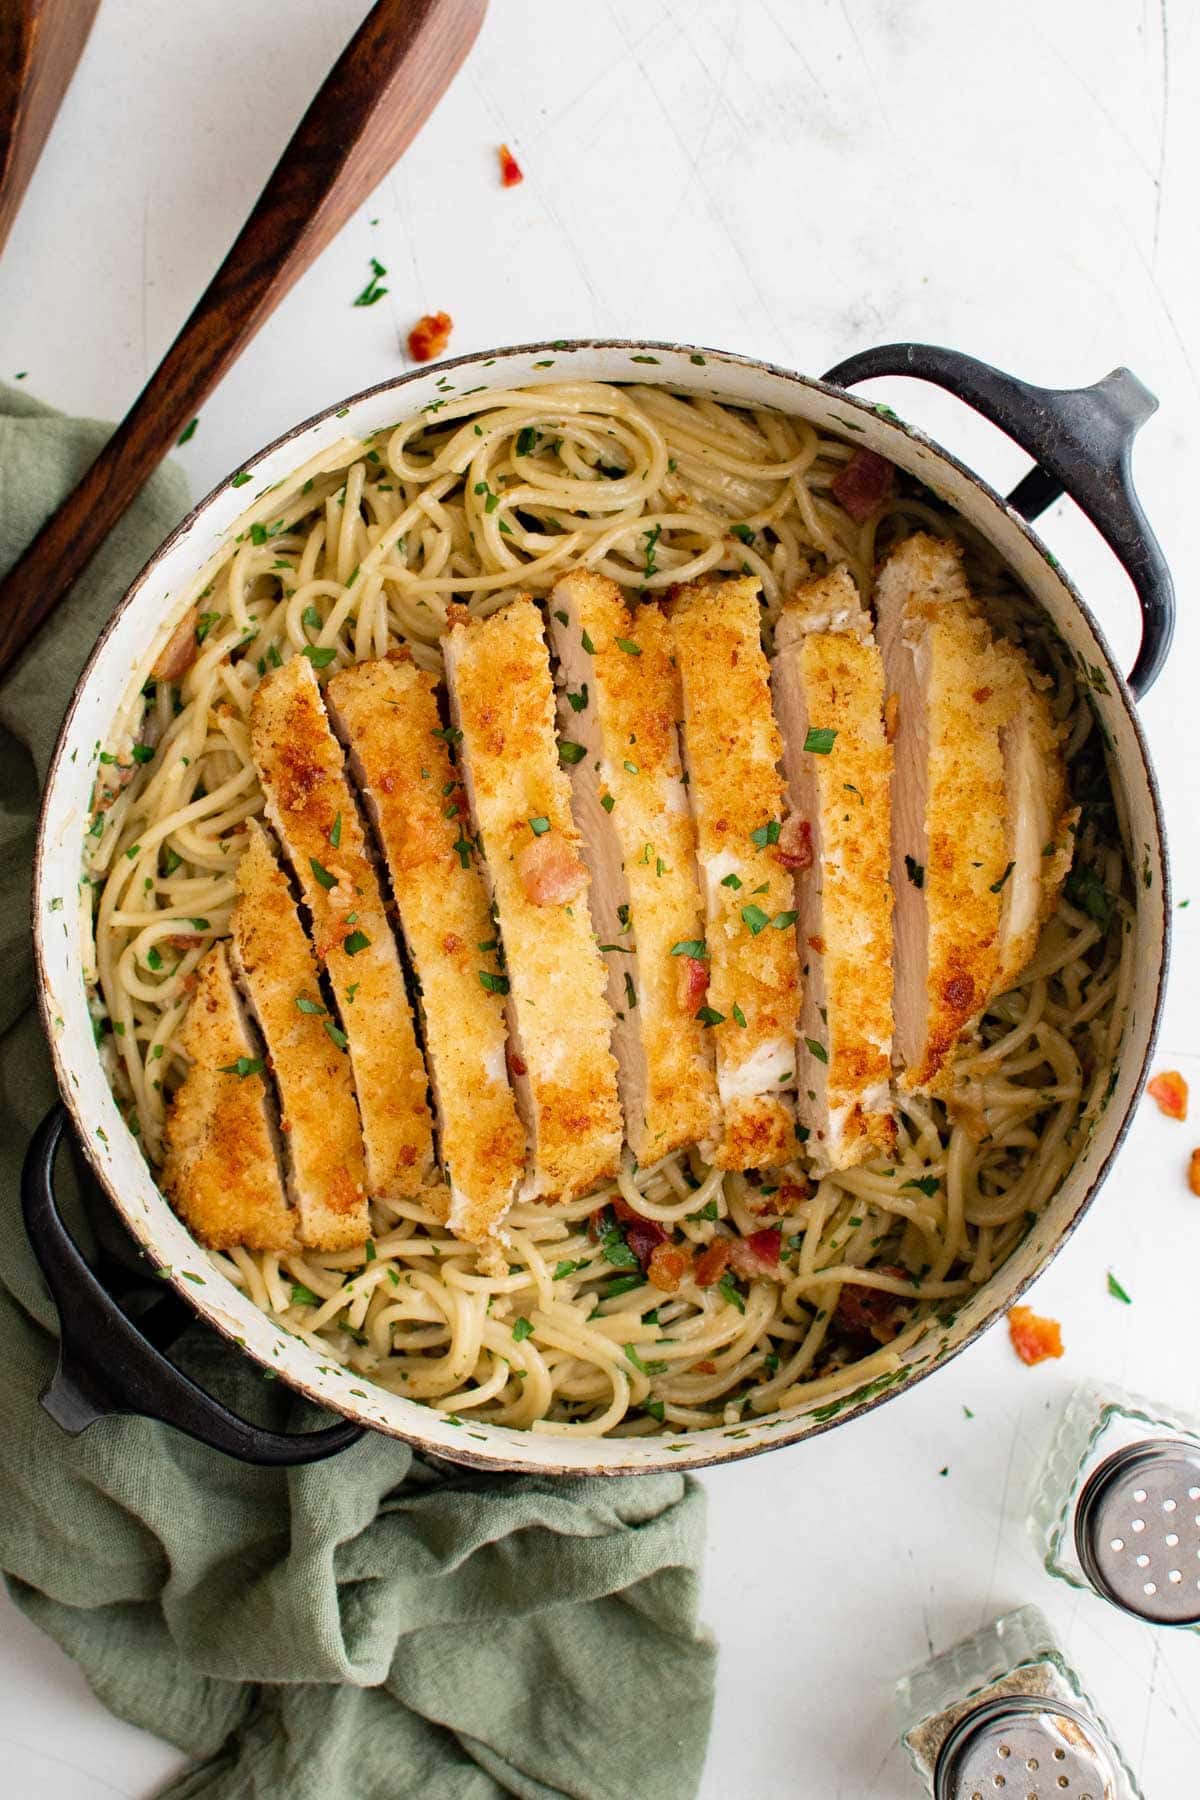 crispy chicken breast on a bed of noodles with carbonara sauce